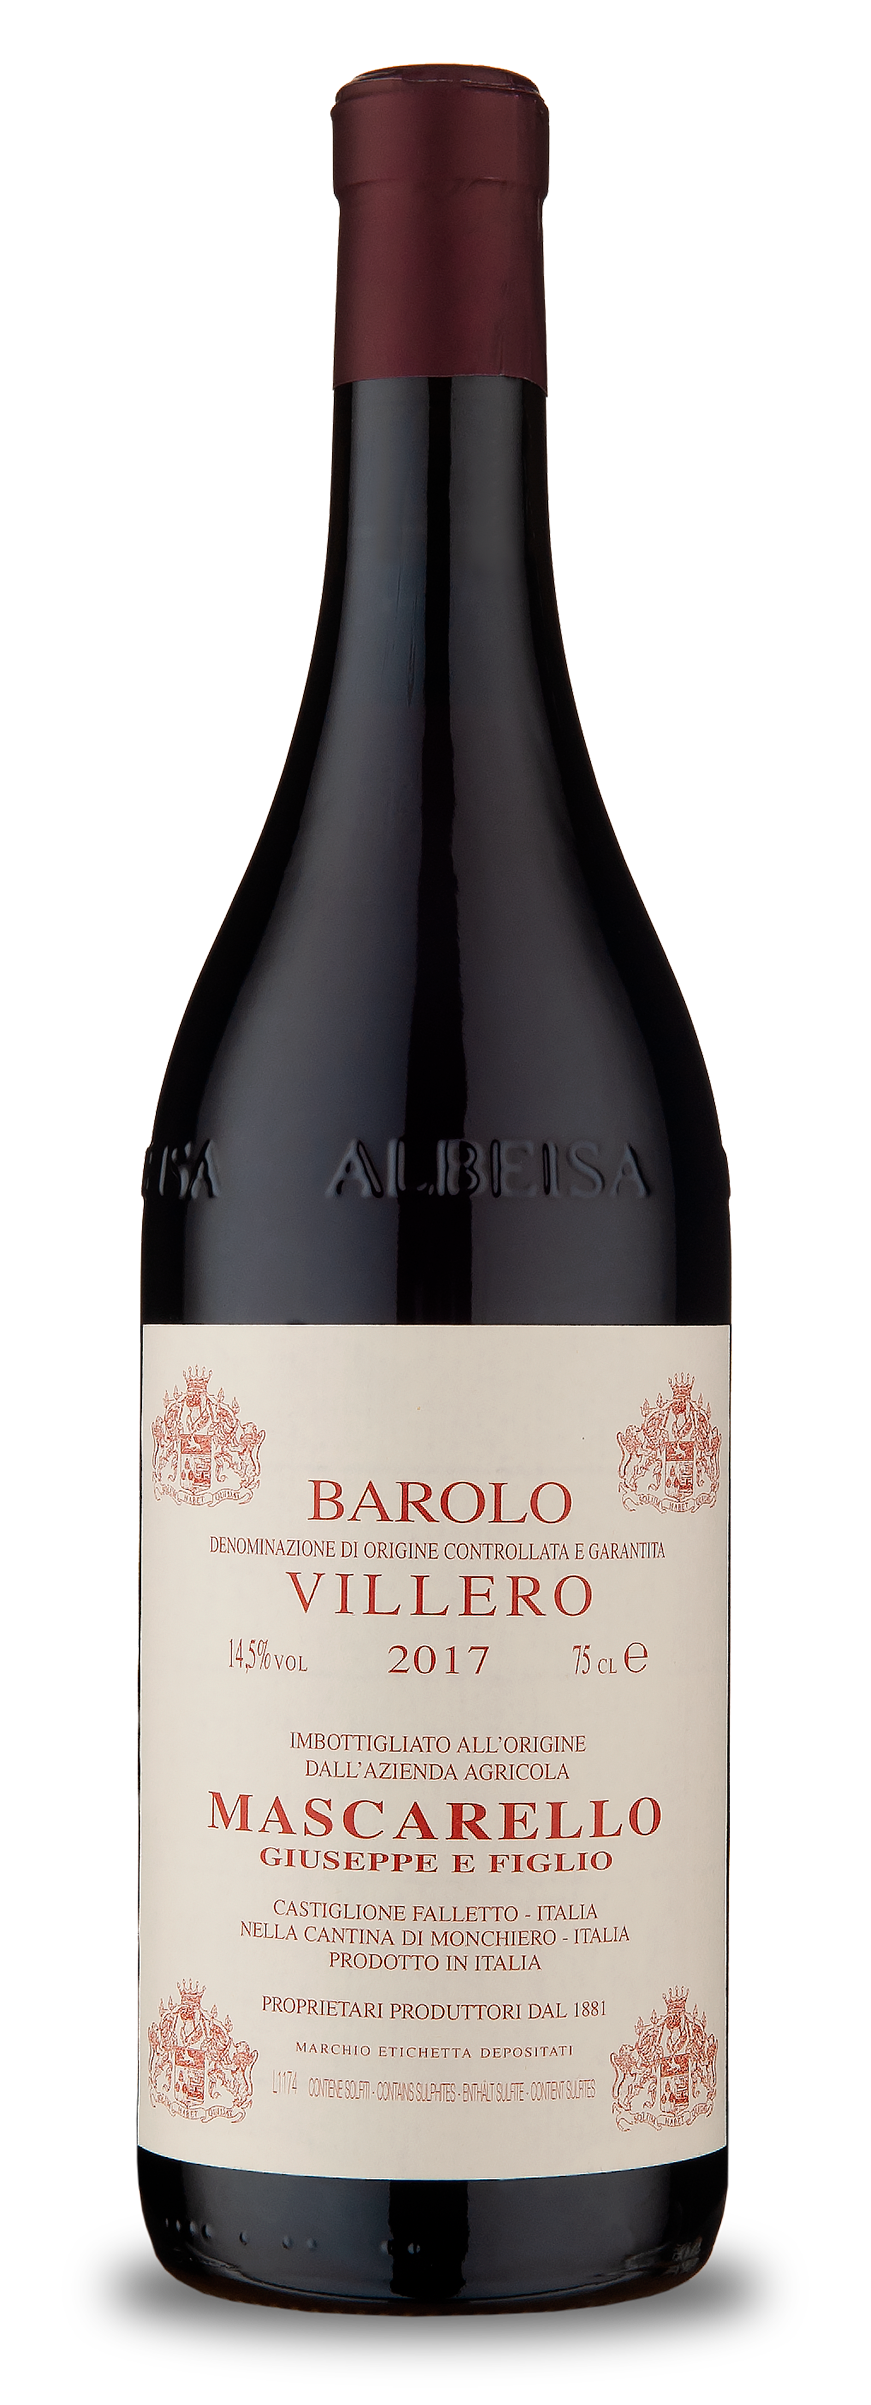 Barolo Villero 2017 - ONLY ON PRE-ALLOCATION Contact us for further information (indulge@flemmings.wine)